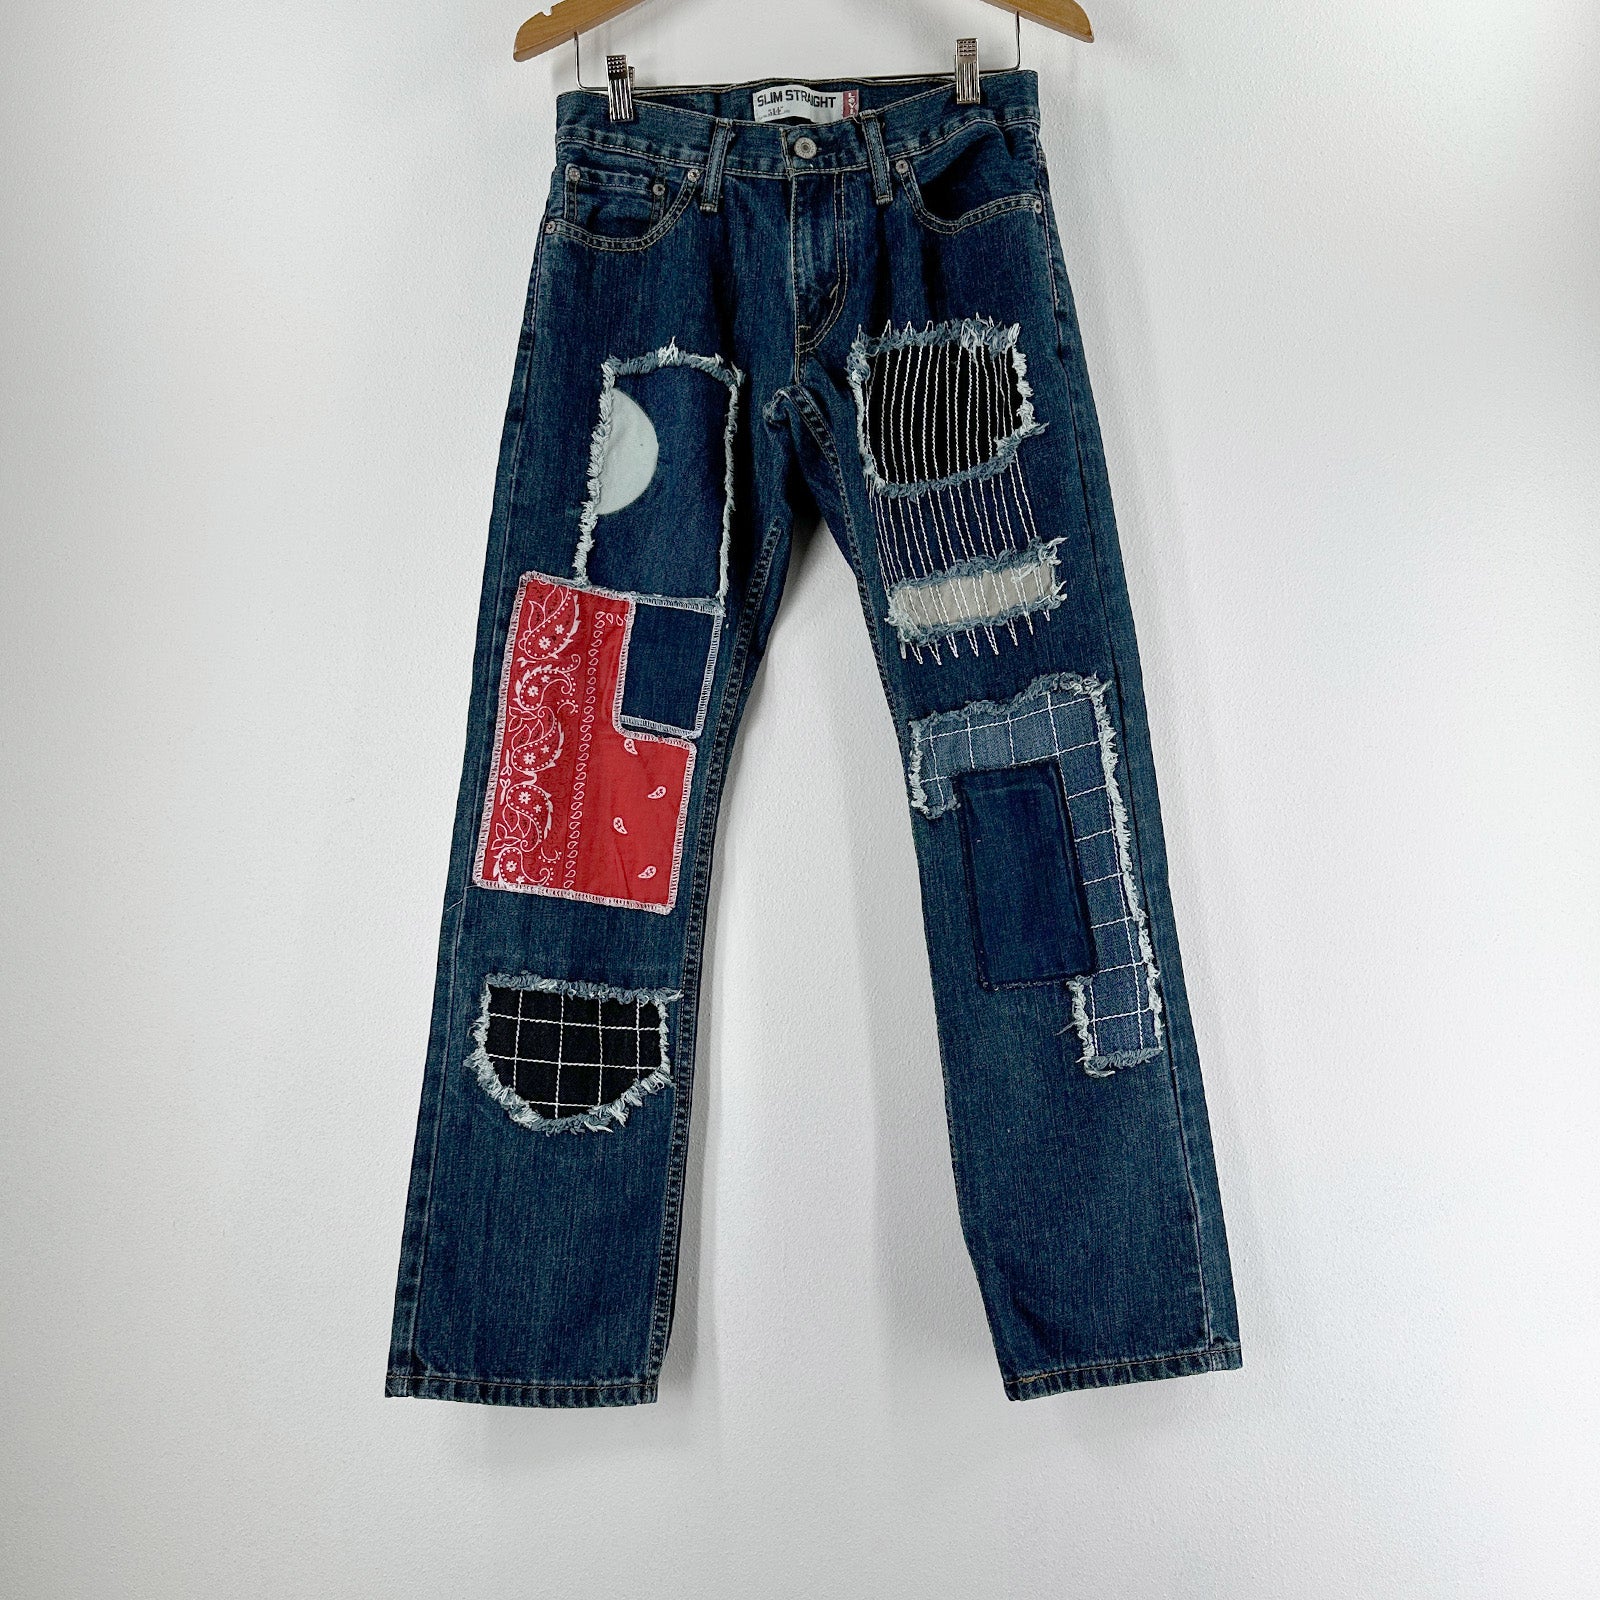 Bandana Patched Reclaimed Levi's 514 Straight Leg - 28x30 Great Lakes Reclaimed Denim